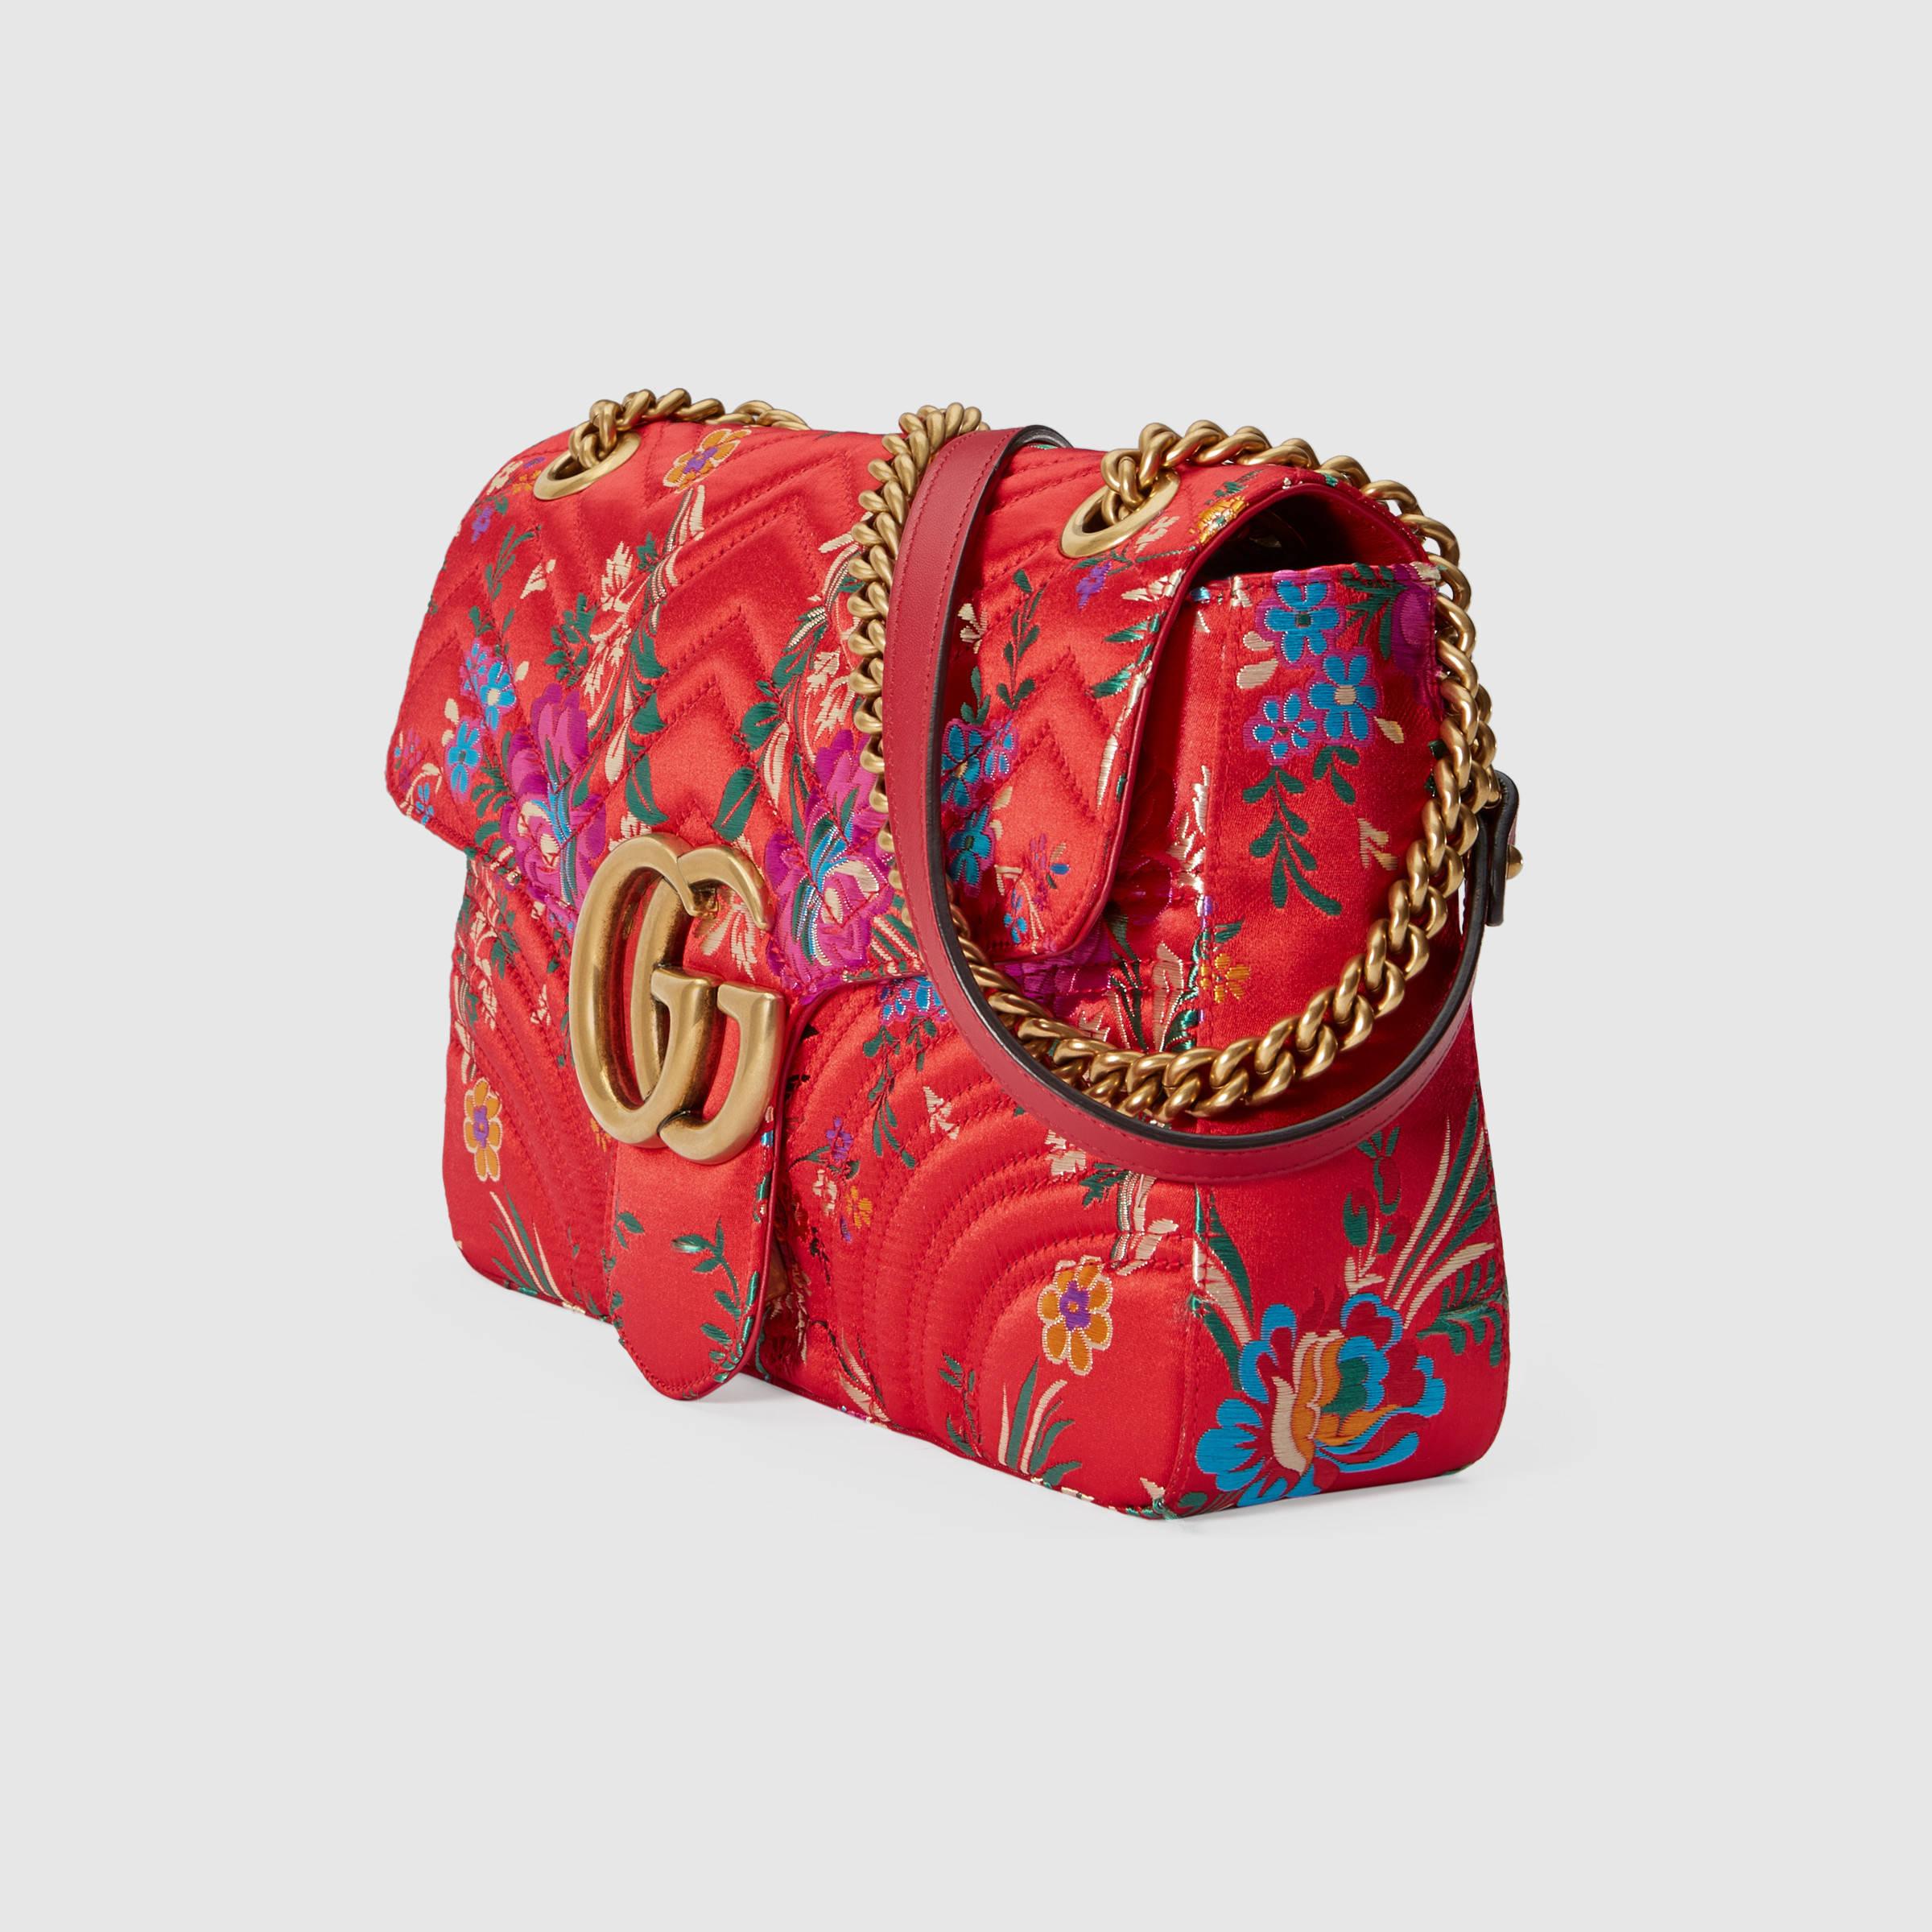 Gucci Gg Marmont Floral Jacquard Shoulder Bag in Red | Lyst